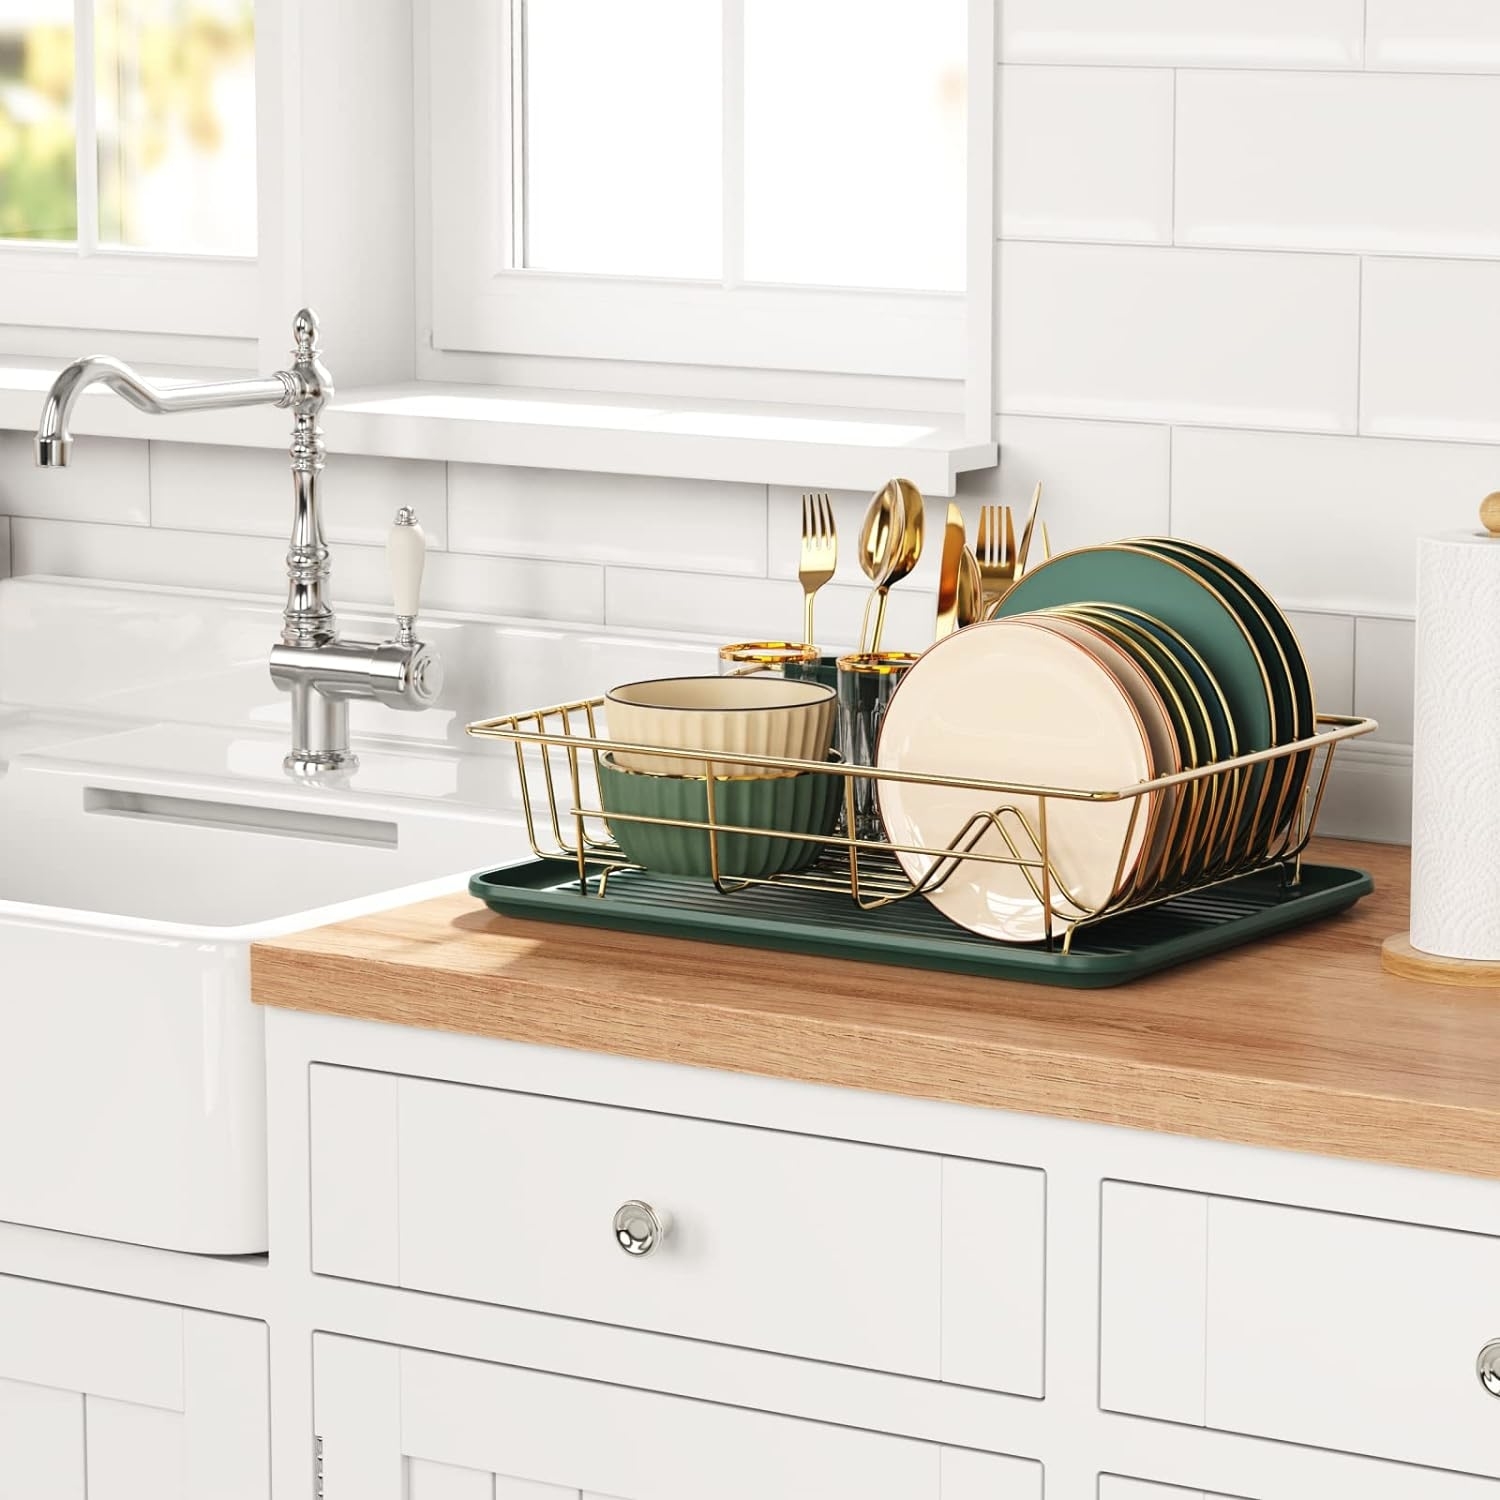 A dish rack with plates, cups, and utensils on a kitchen countertop near a sink, showcasing organization options for readers interested in shopping